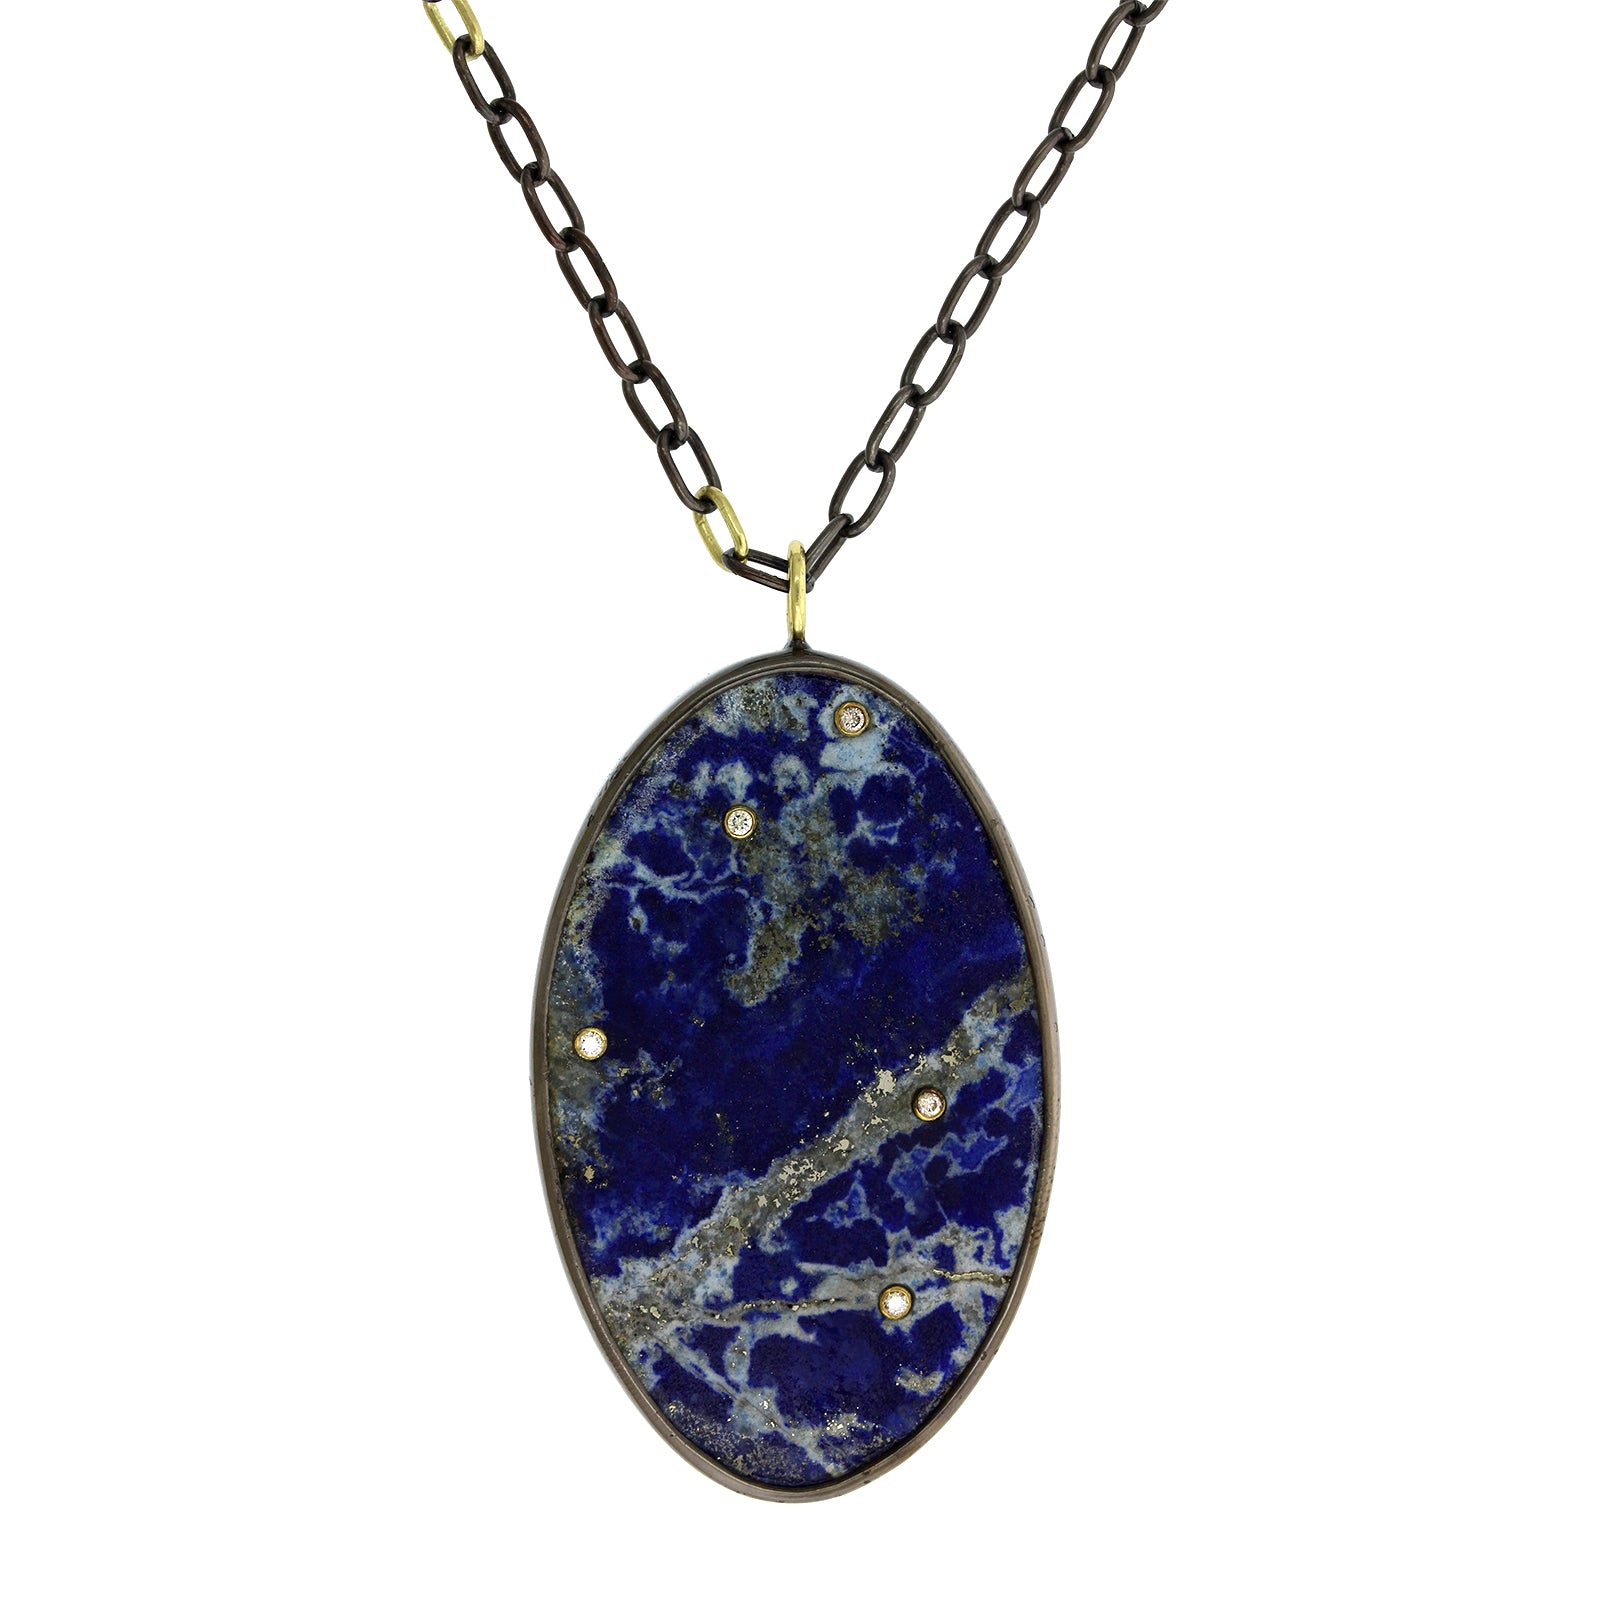 18K Yellow Gold and Sterling Silver Lapis Necklace